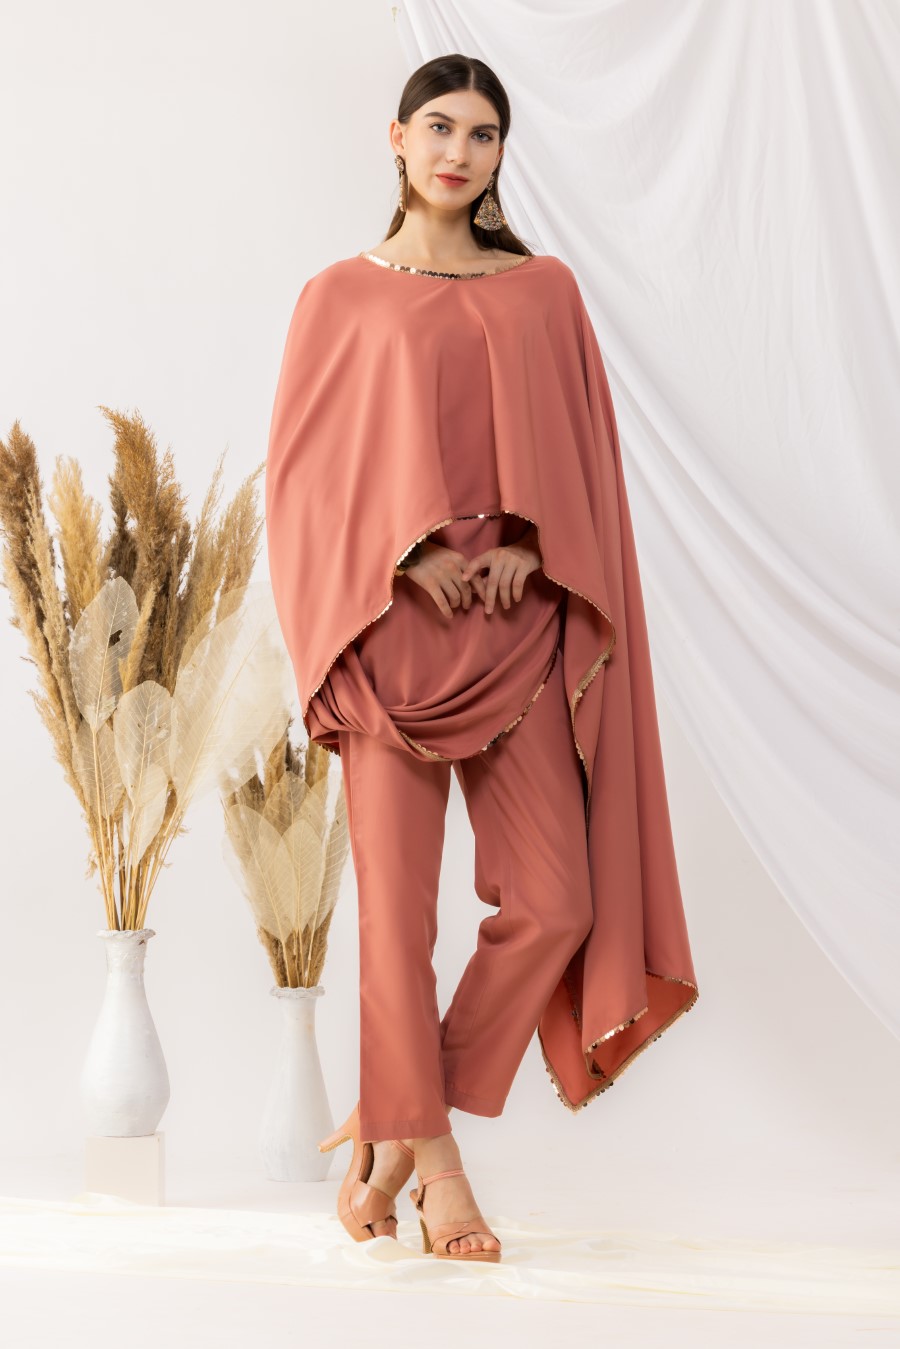 Coral Rose Cape Bohemian Style Drape Top With Staight pant